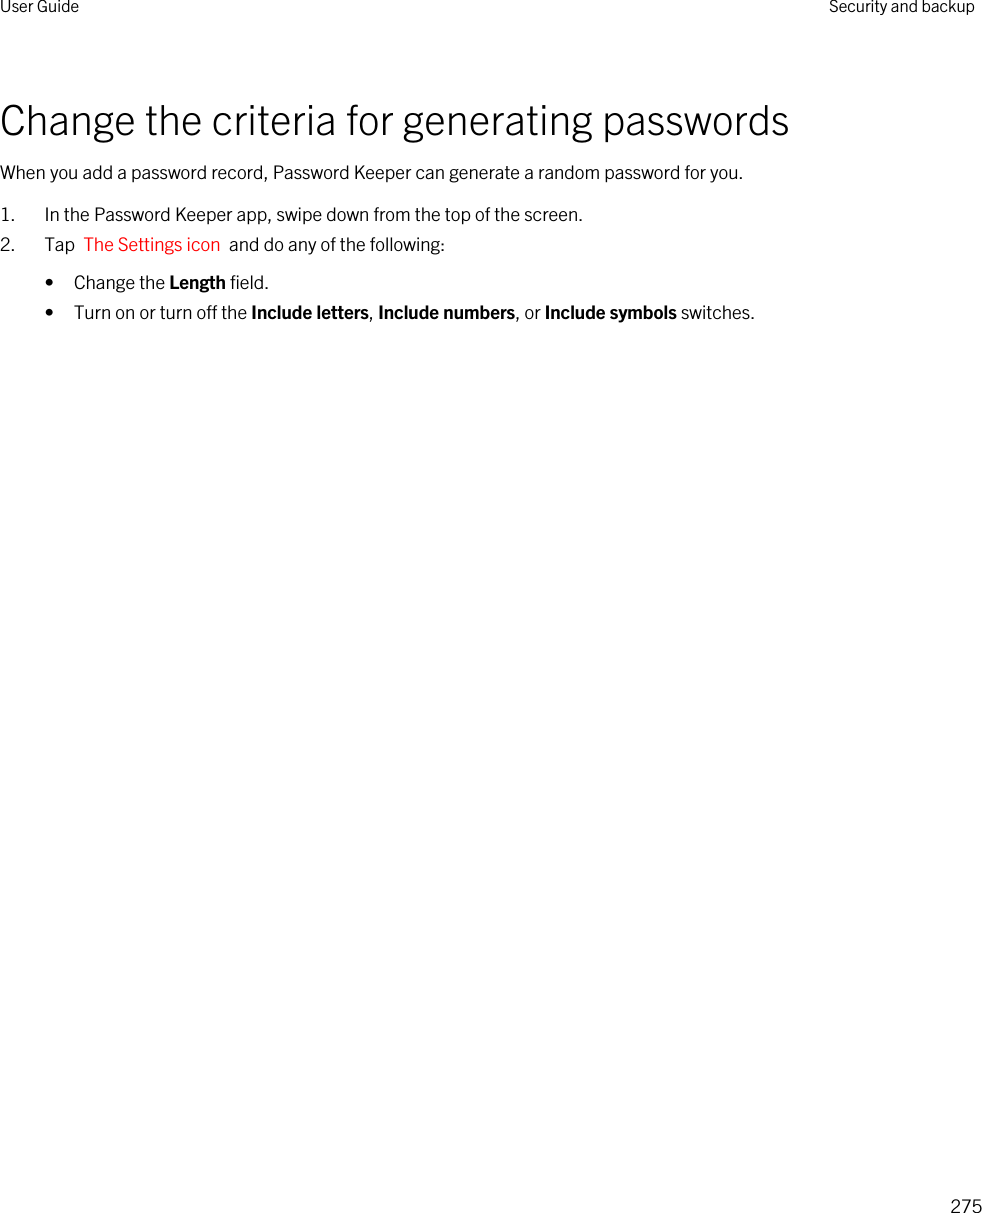 Change the criteria for generating passwordsWhen you add a password record, Password Keeper can generate a random password for you.1. In the Password Keeper app, swipe down from the top of the screen.2. Tap  The Settings icon  and do any of the following:• Change the Length field.• Turn on or turn off the Include letters, Include numbers, or Include symbols switches.User Guide Security and backup275